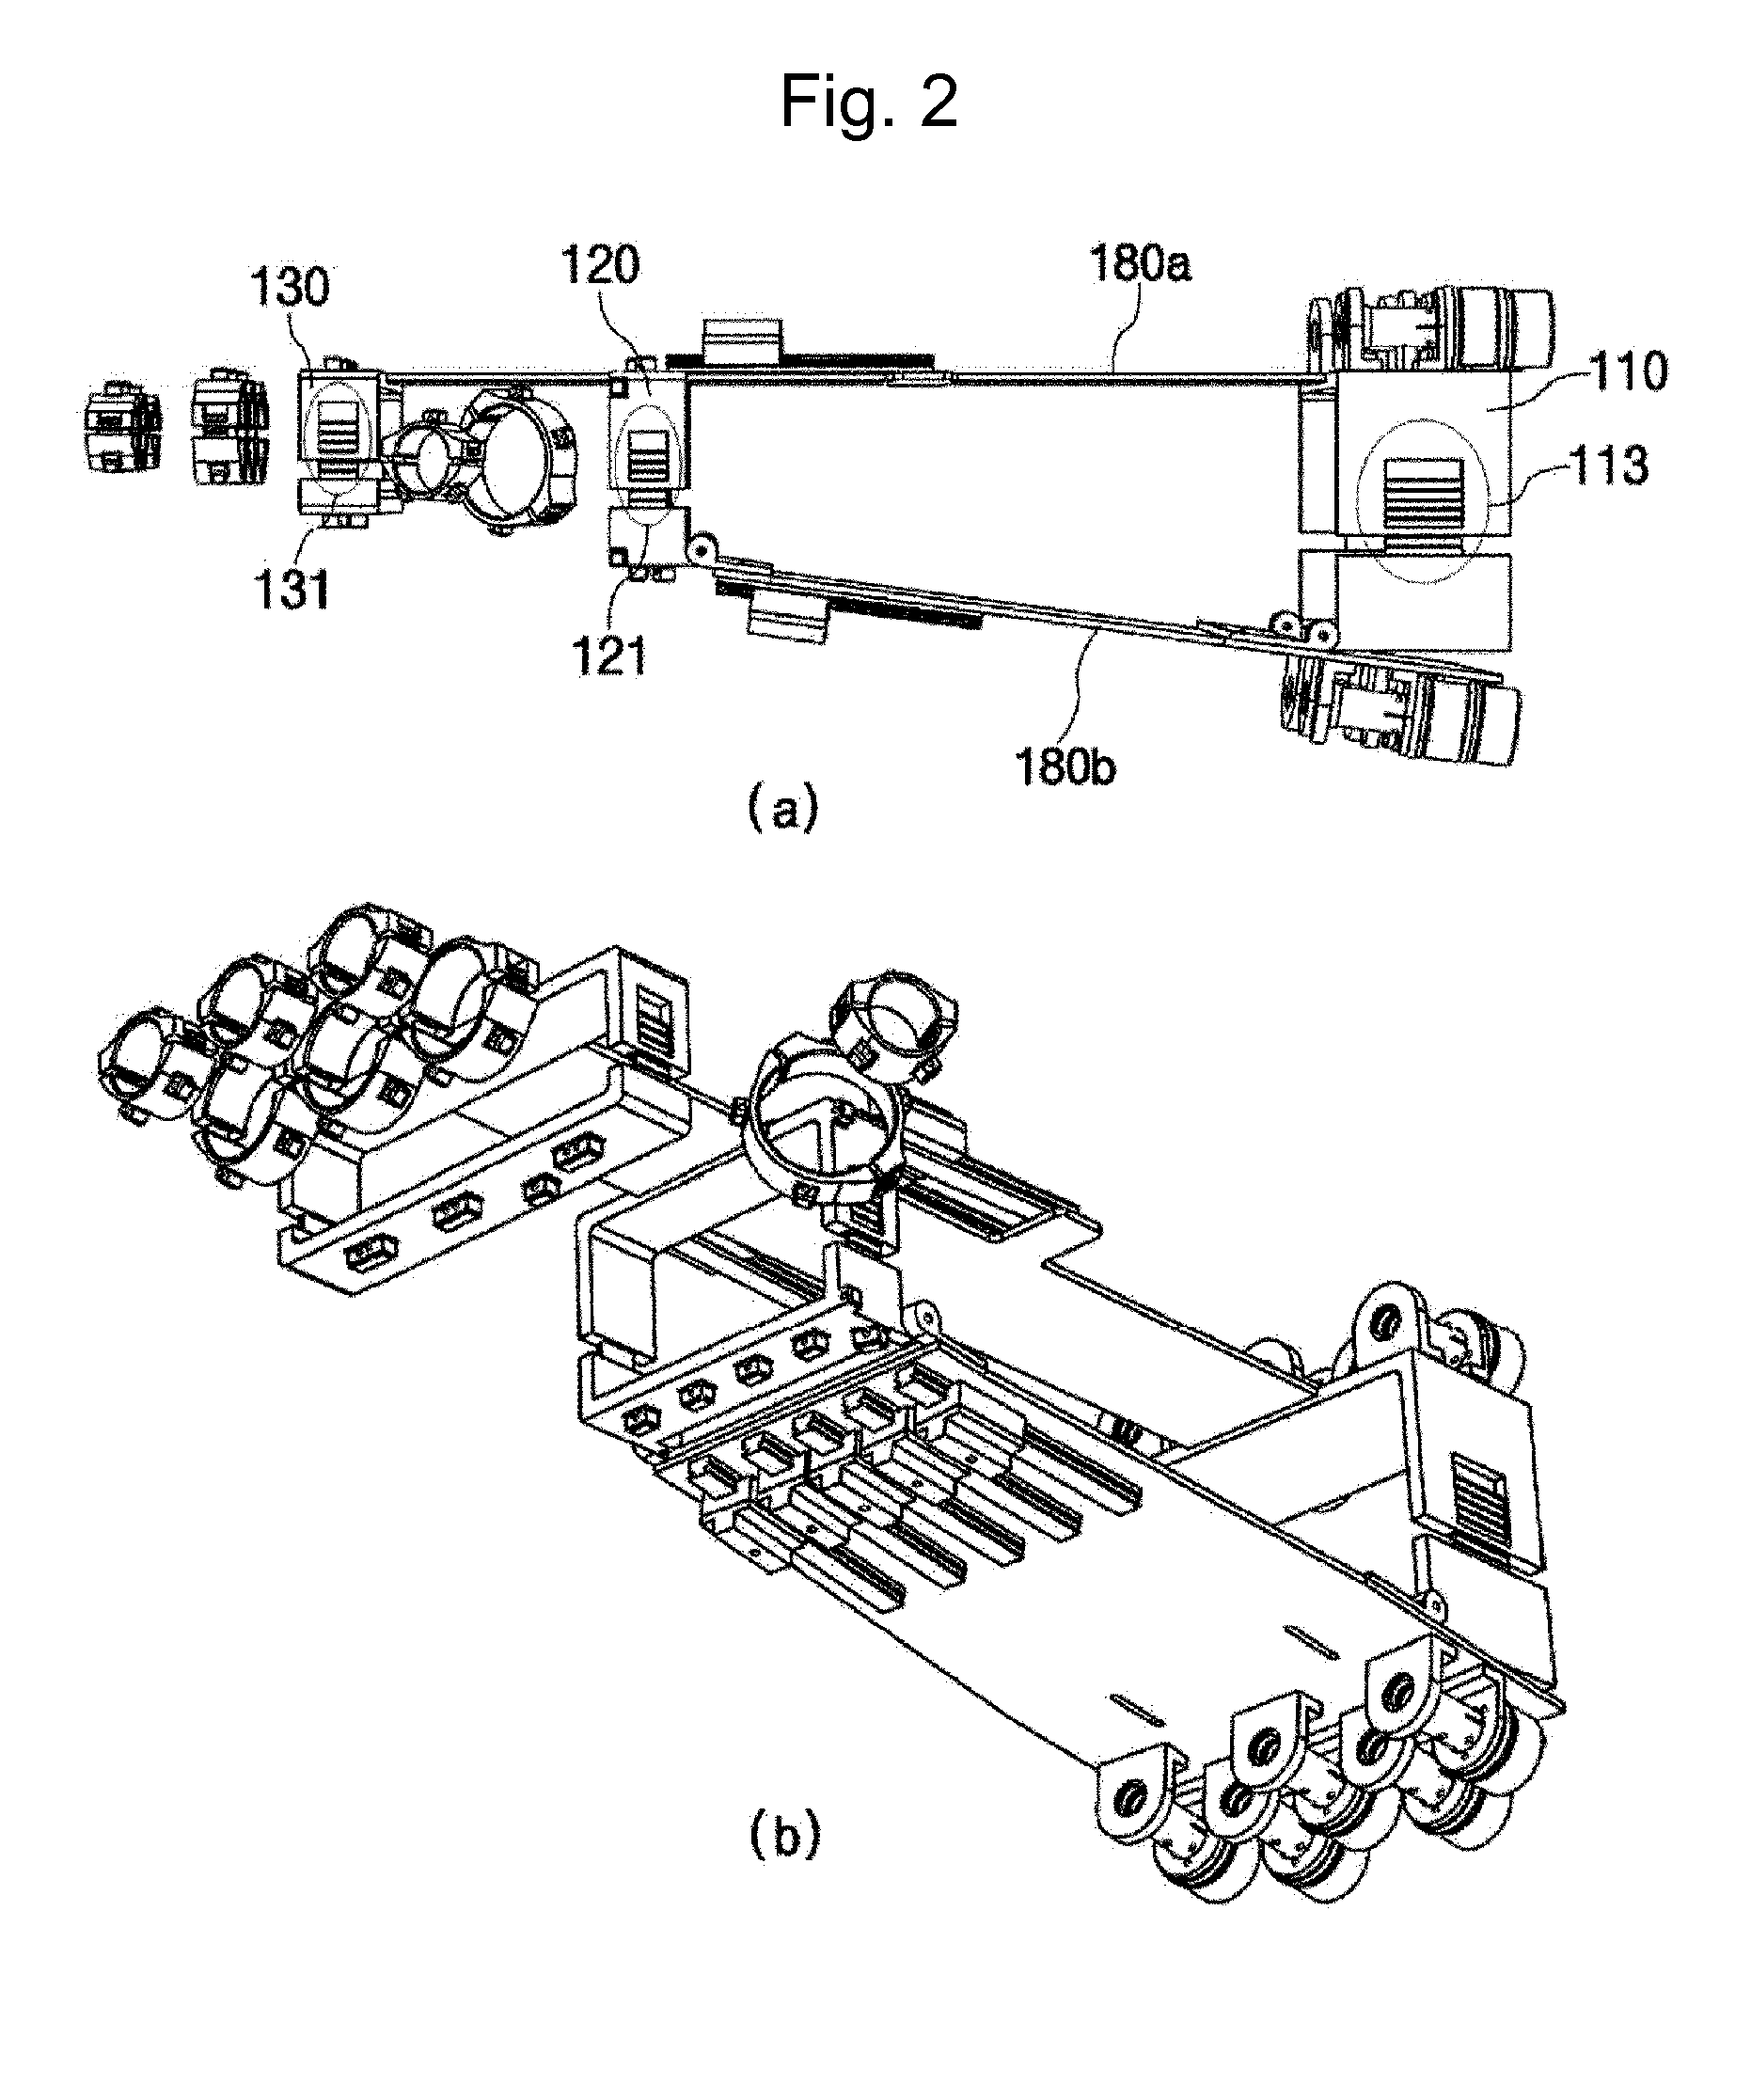 Motion control device based on winding string